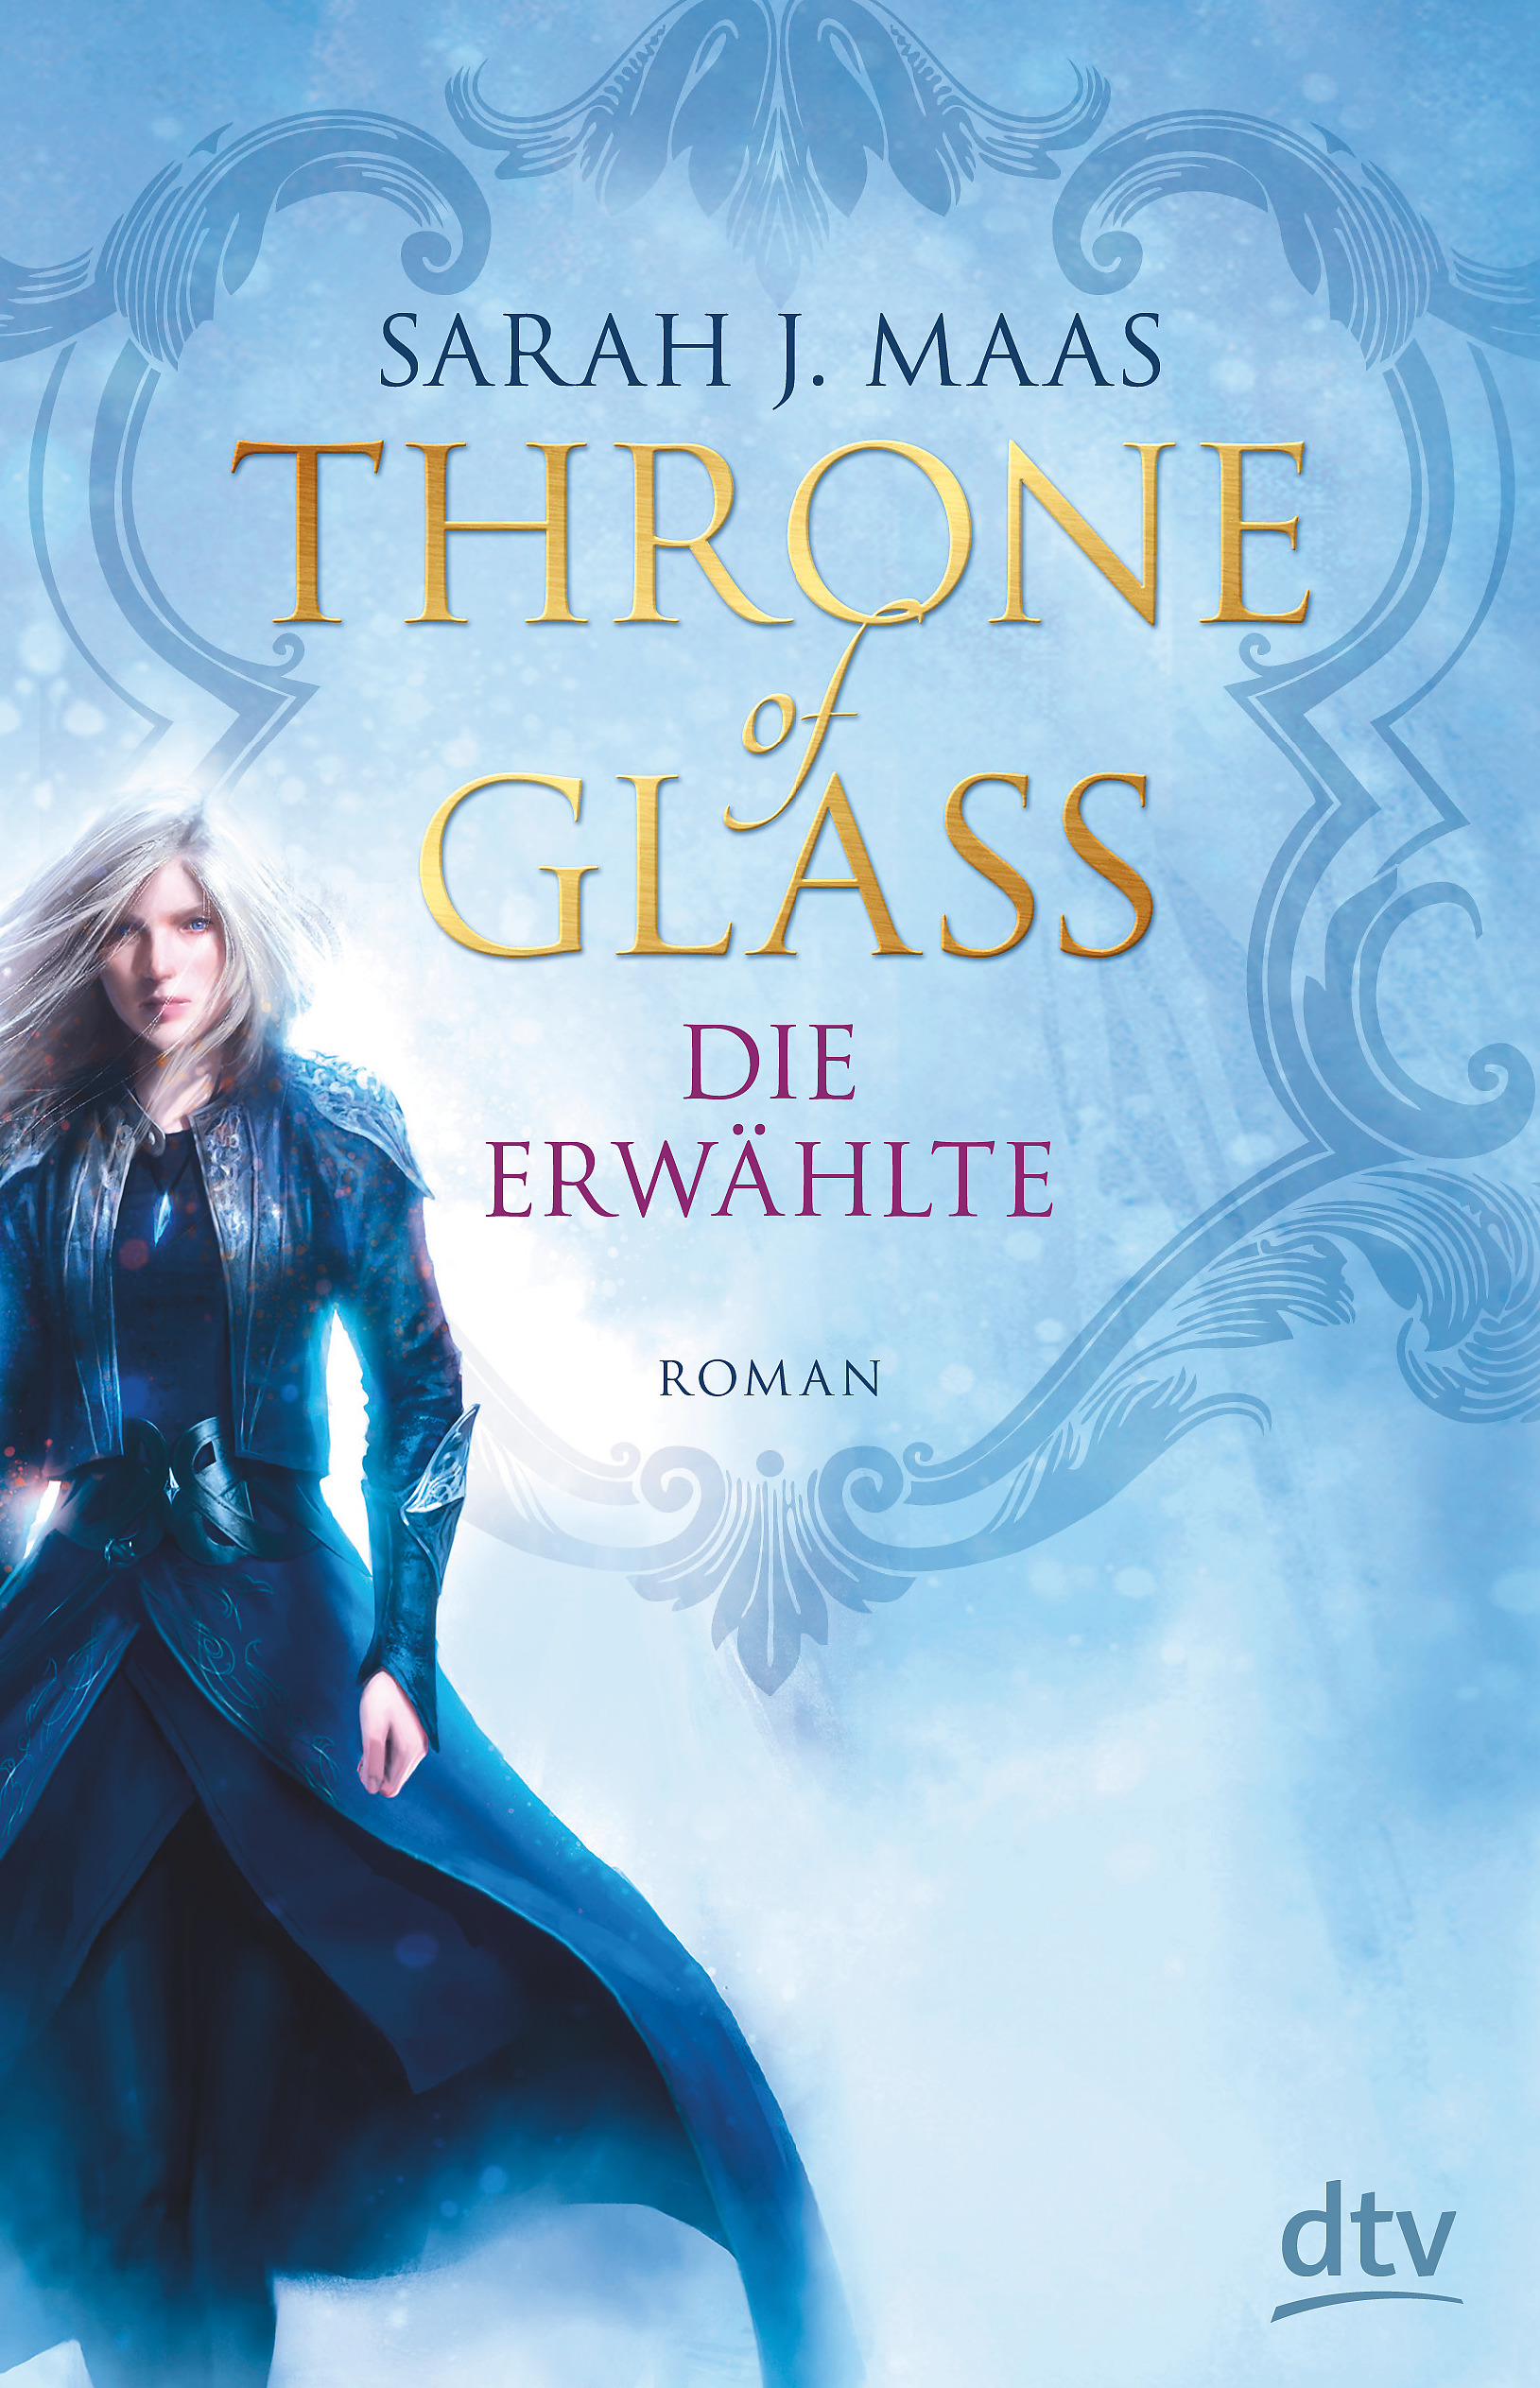 Throne of Glass - Die Erwählte Sarah Maas - Picture 1 of 1